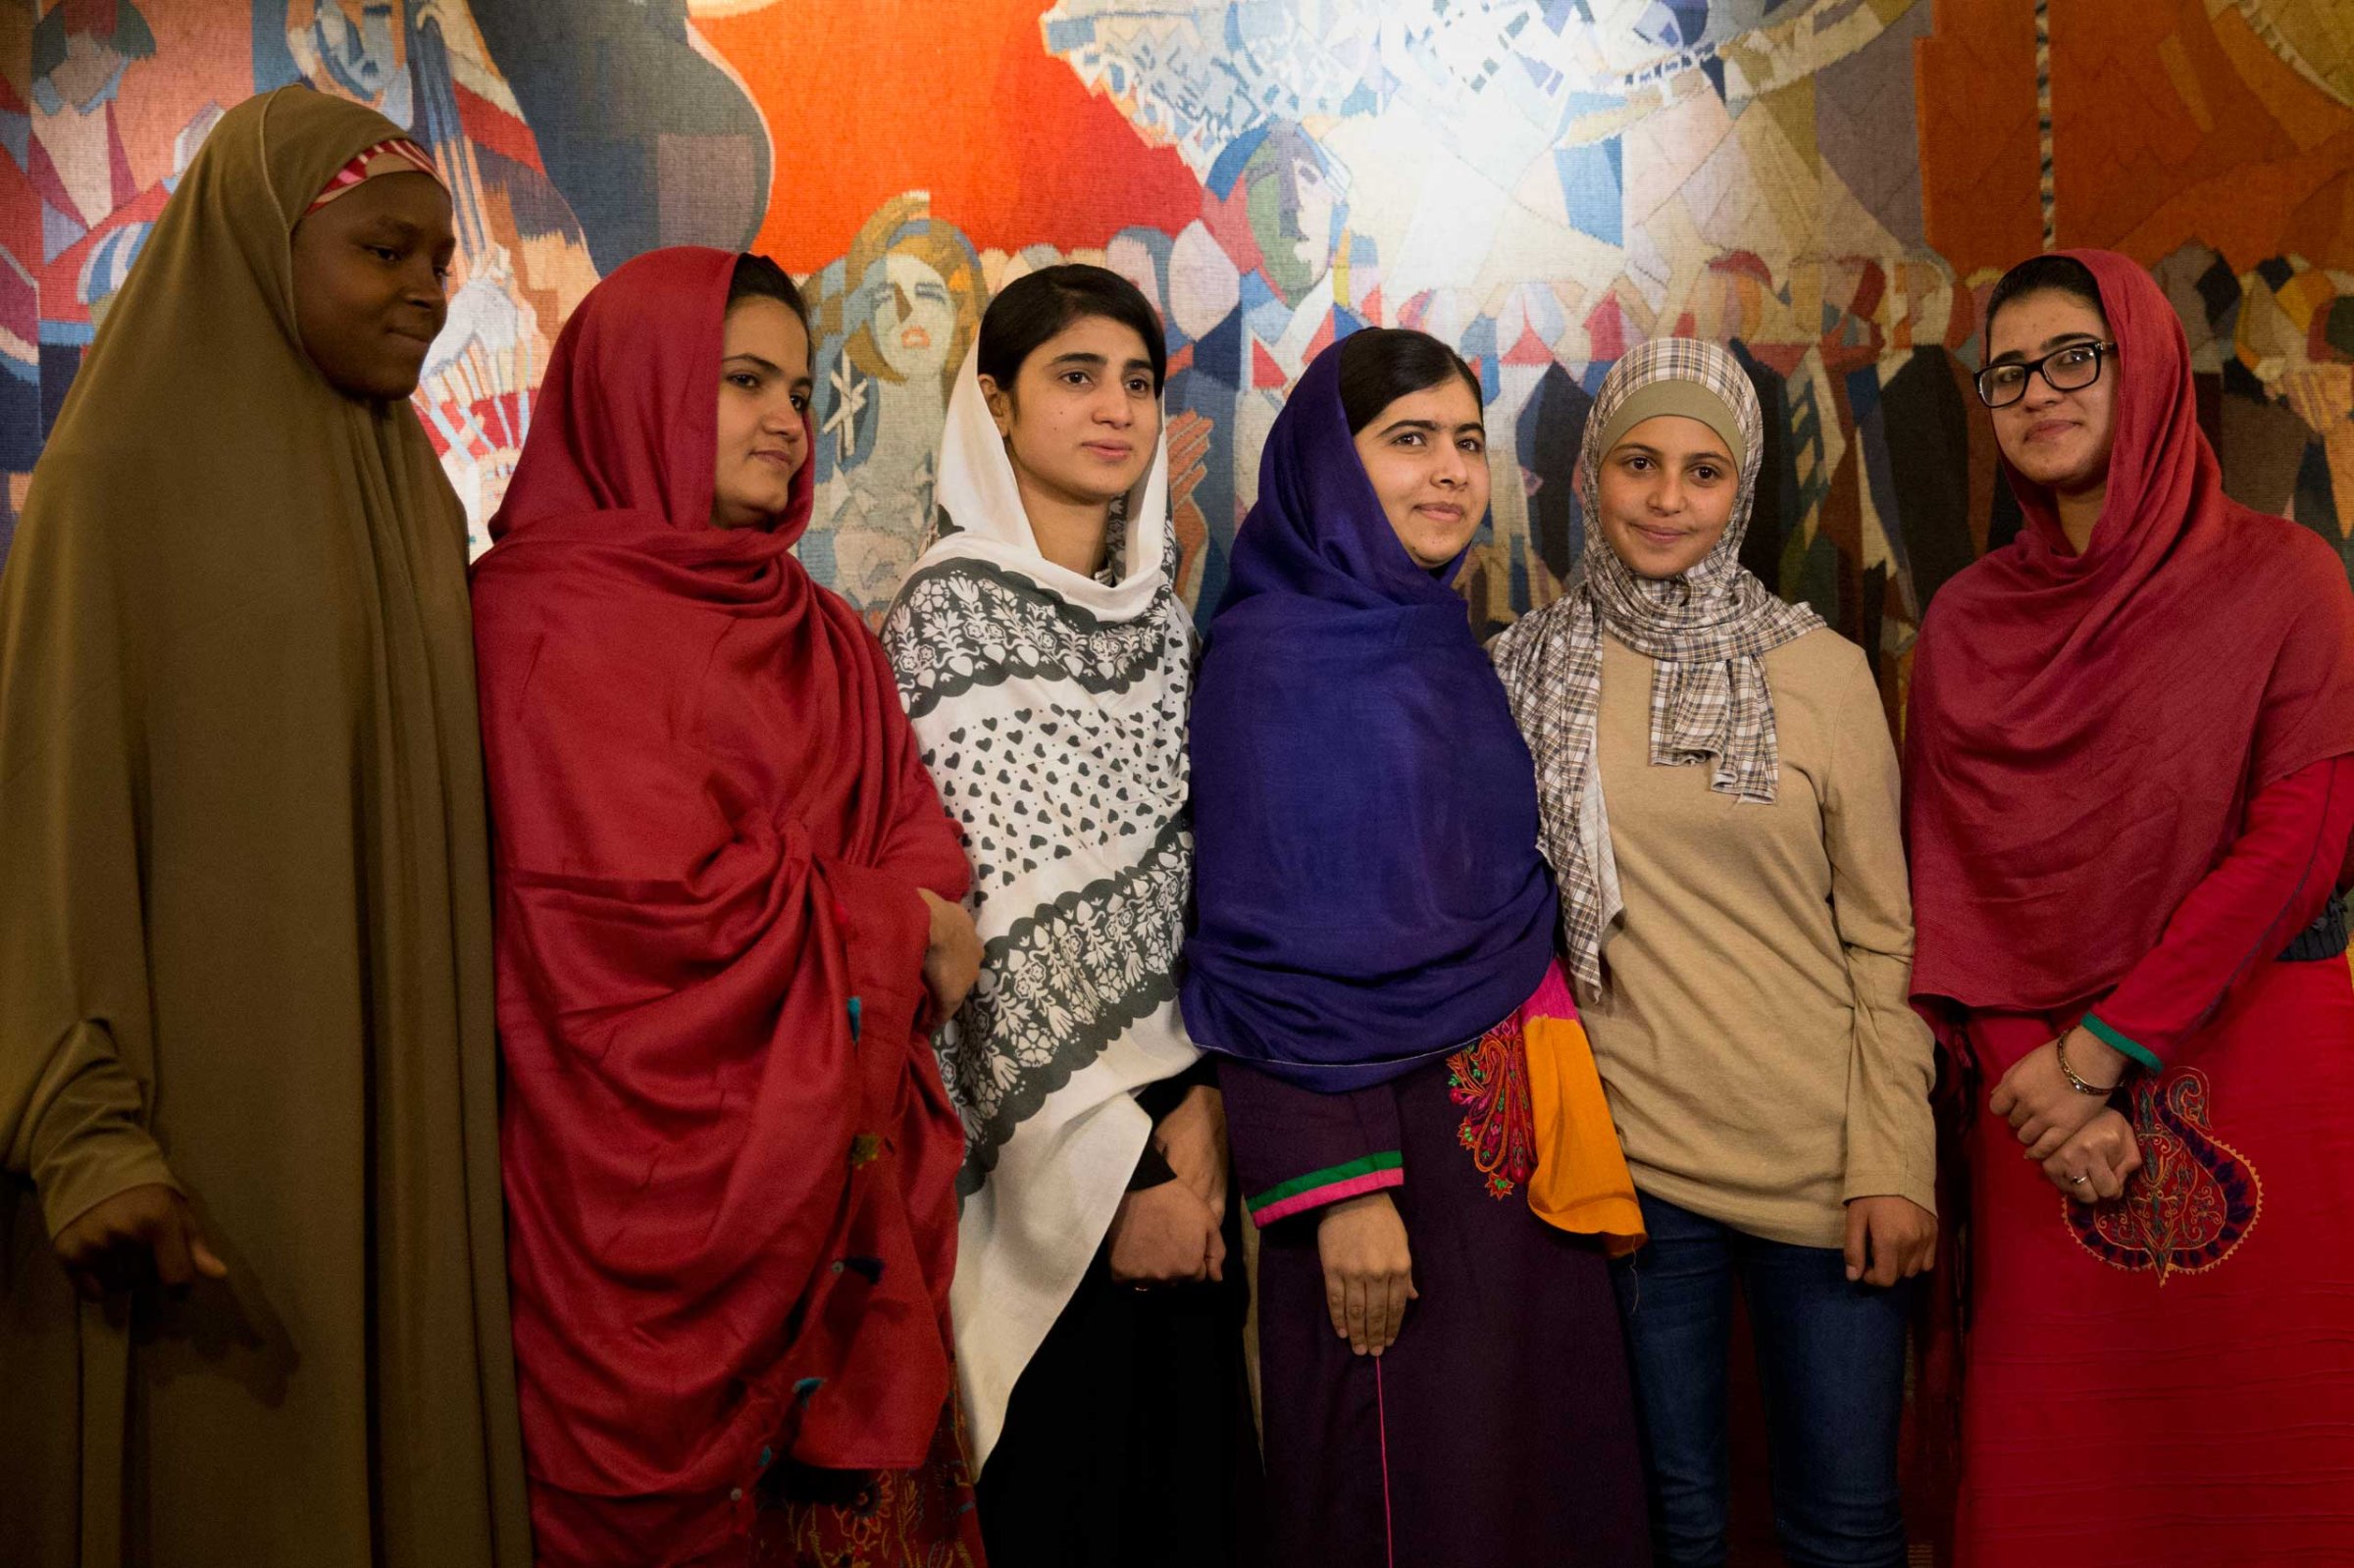 Joint Nobel Peace prize winner Malala Yousafzai, stands with five young women she invited to attend the Nobel Peace Prize ceremony, from left, Nigeria's Amina Yusuf, Pakistan's Kainat Soomro, school friend Shazia Ramzan, Syria's Mezon Almellehan and school friend Kainat Riaz, as they pose for a group photograph before speaking to the media at Malala's hotel in Oslo, Norway, Dec. 9, 2014.